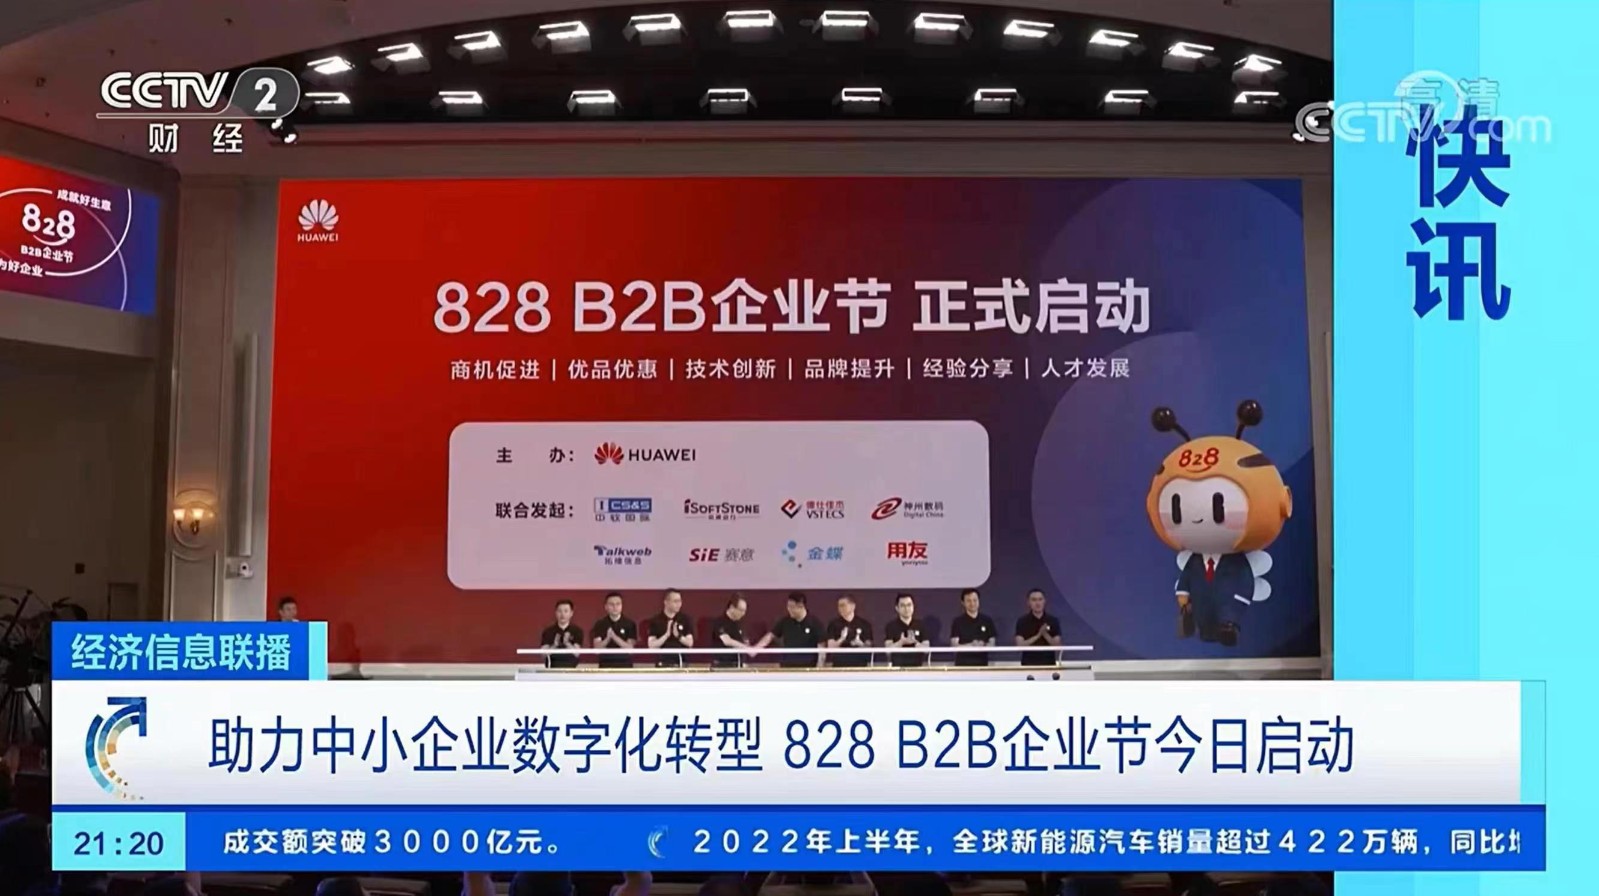 SIE Information jointly launched the 828 B2B Enterprise Festival to assist small and medium-sized ma